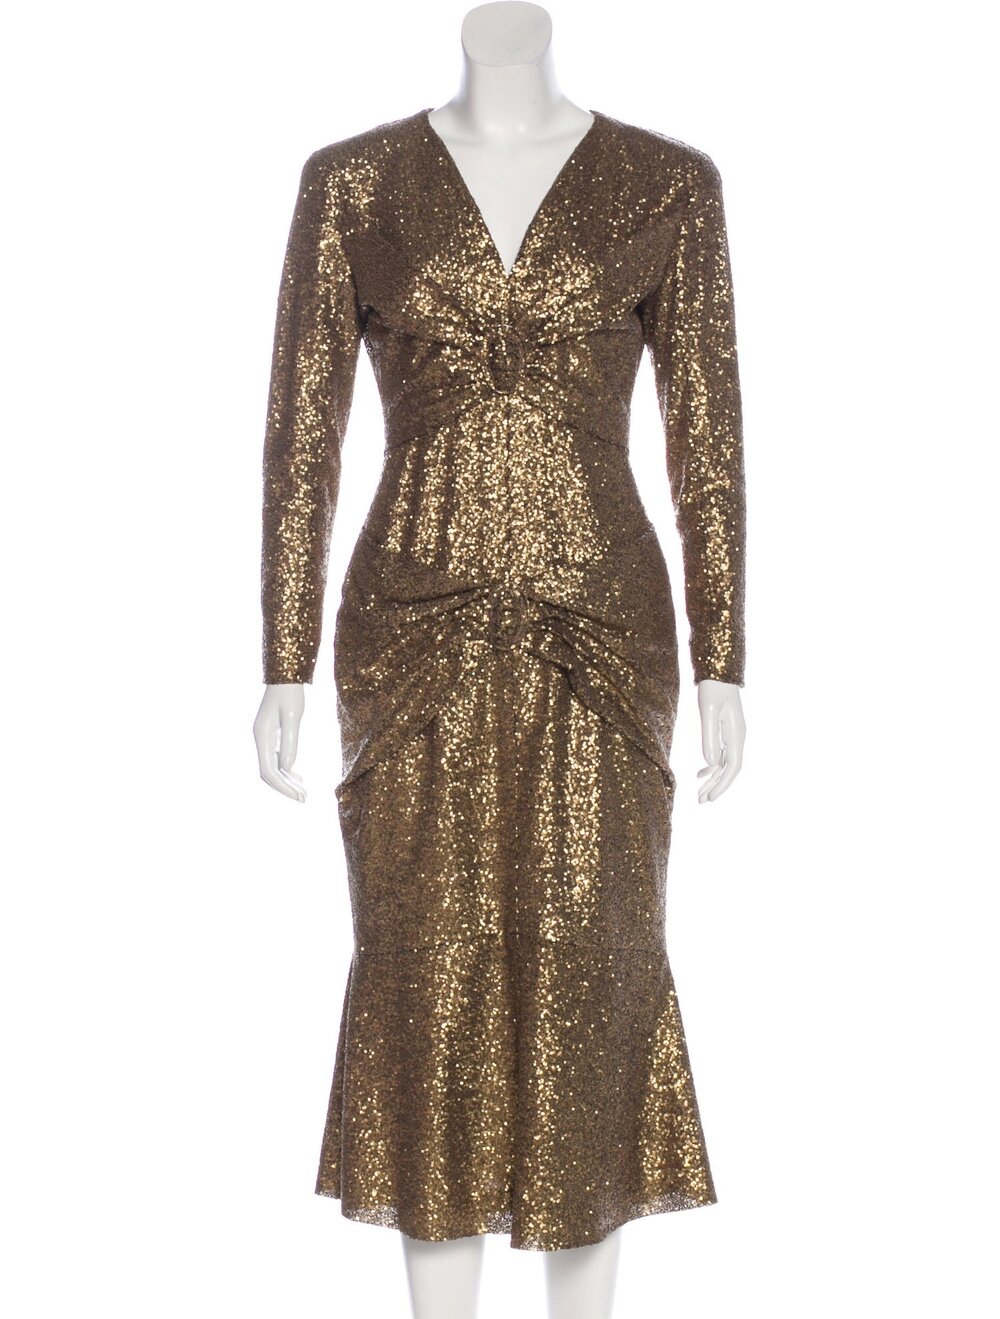 Chanel Gold Sequin Dress — The Posh Pop-Up